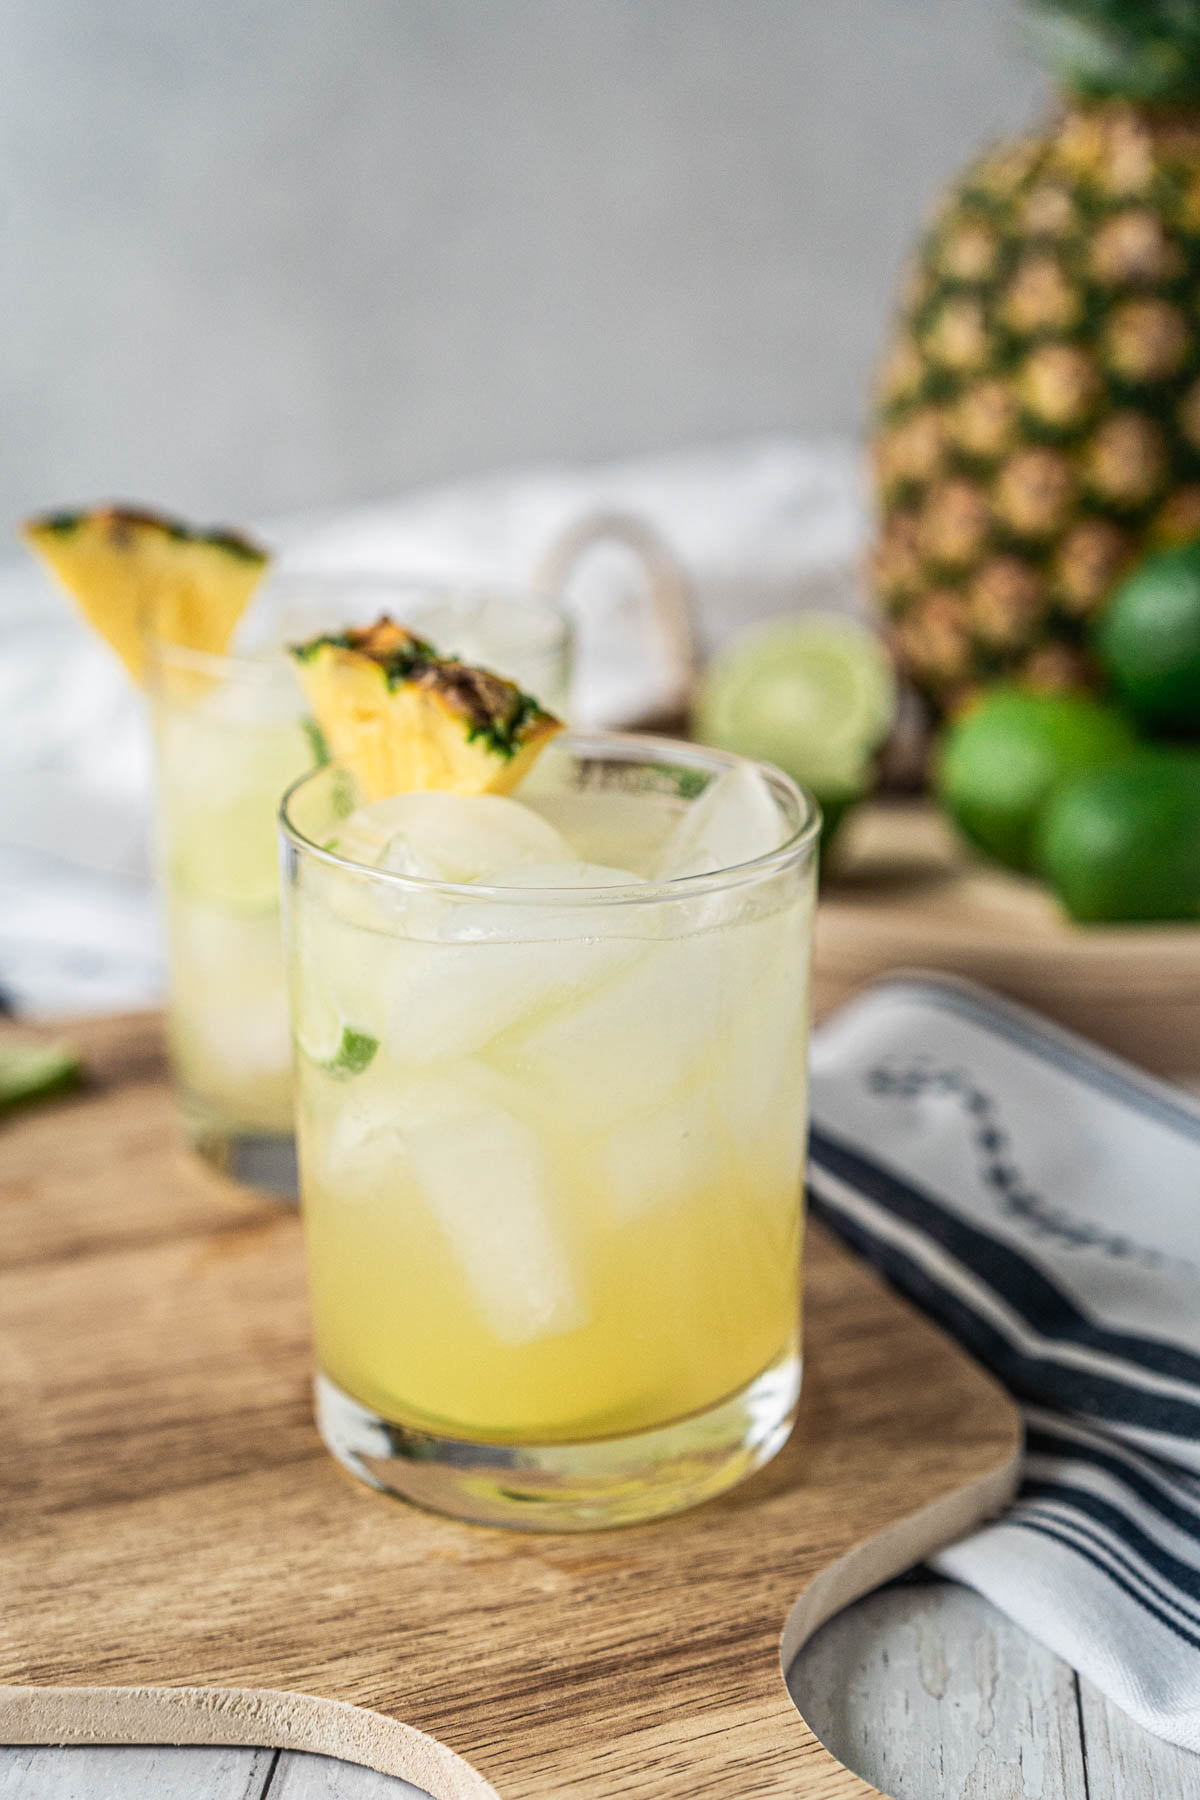 In the foreground, a rocks glass filled with ice and a light yellow drink, garnished with lime and pineapple wedges sits on a cutting board. Blurred in the background is another matching glass, a large pineapple, and sliced limes